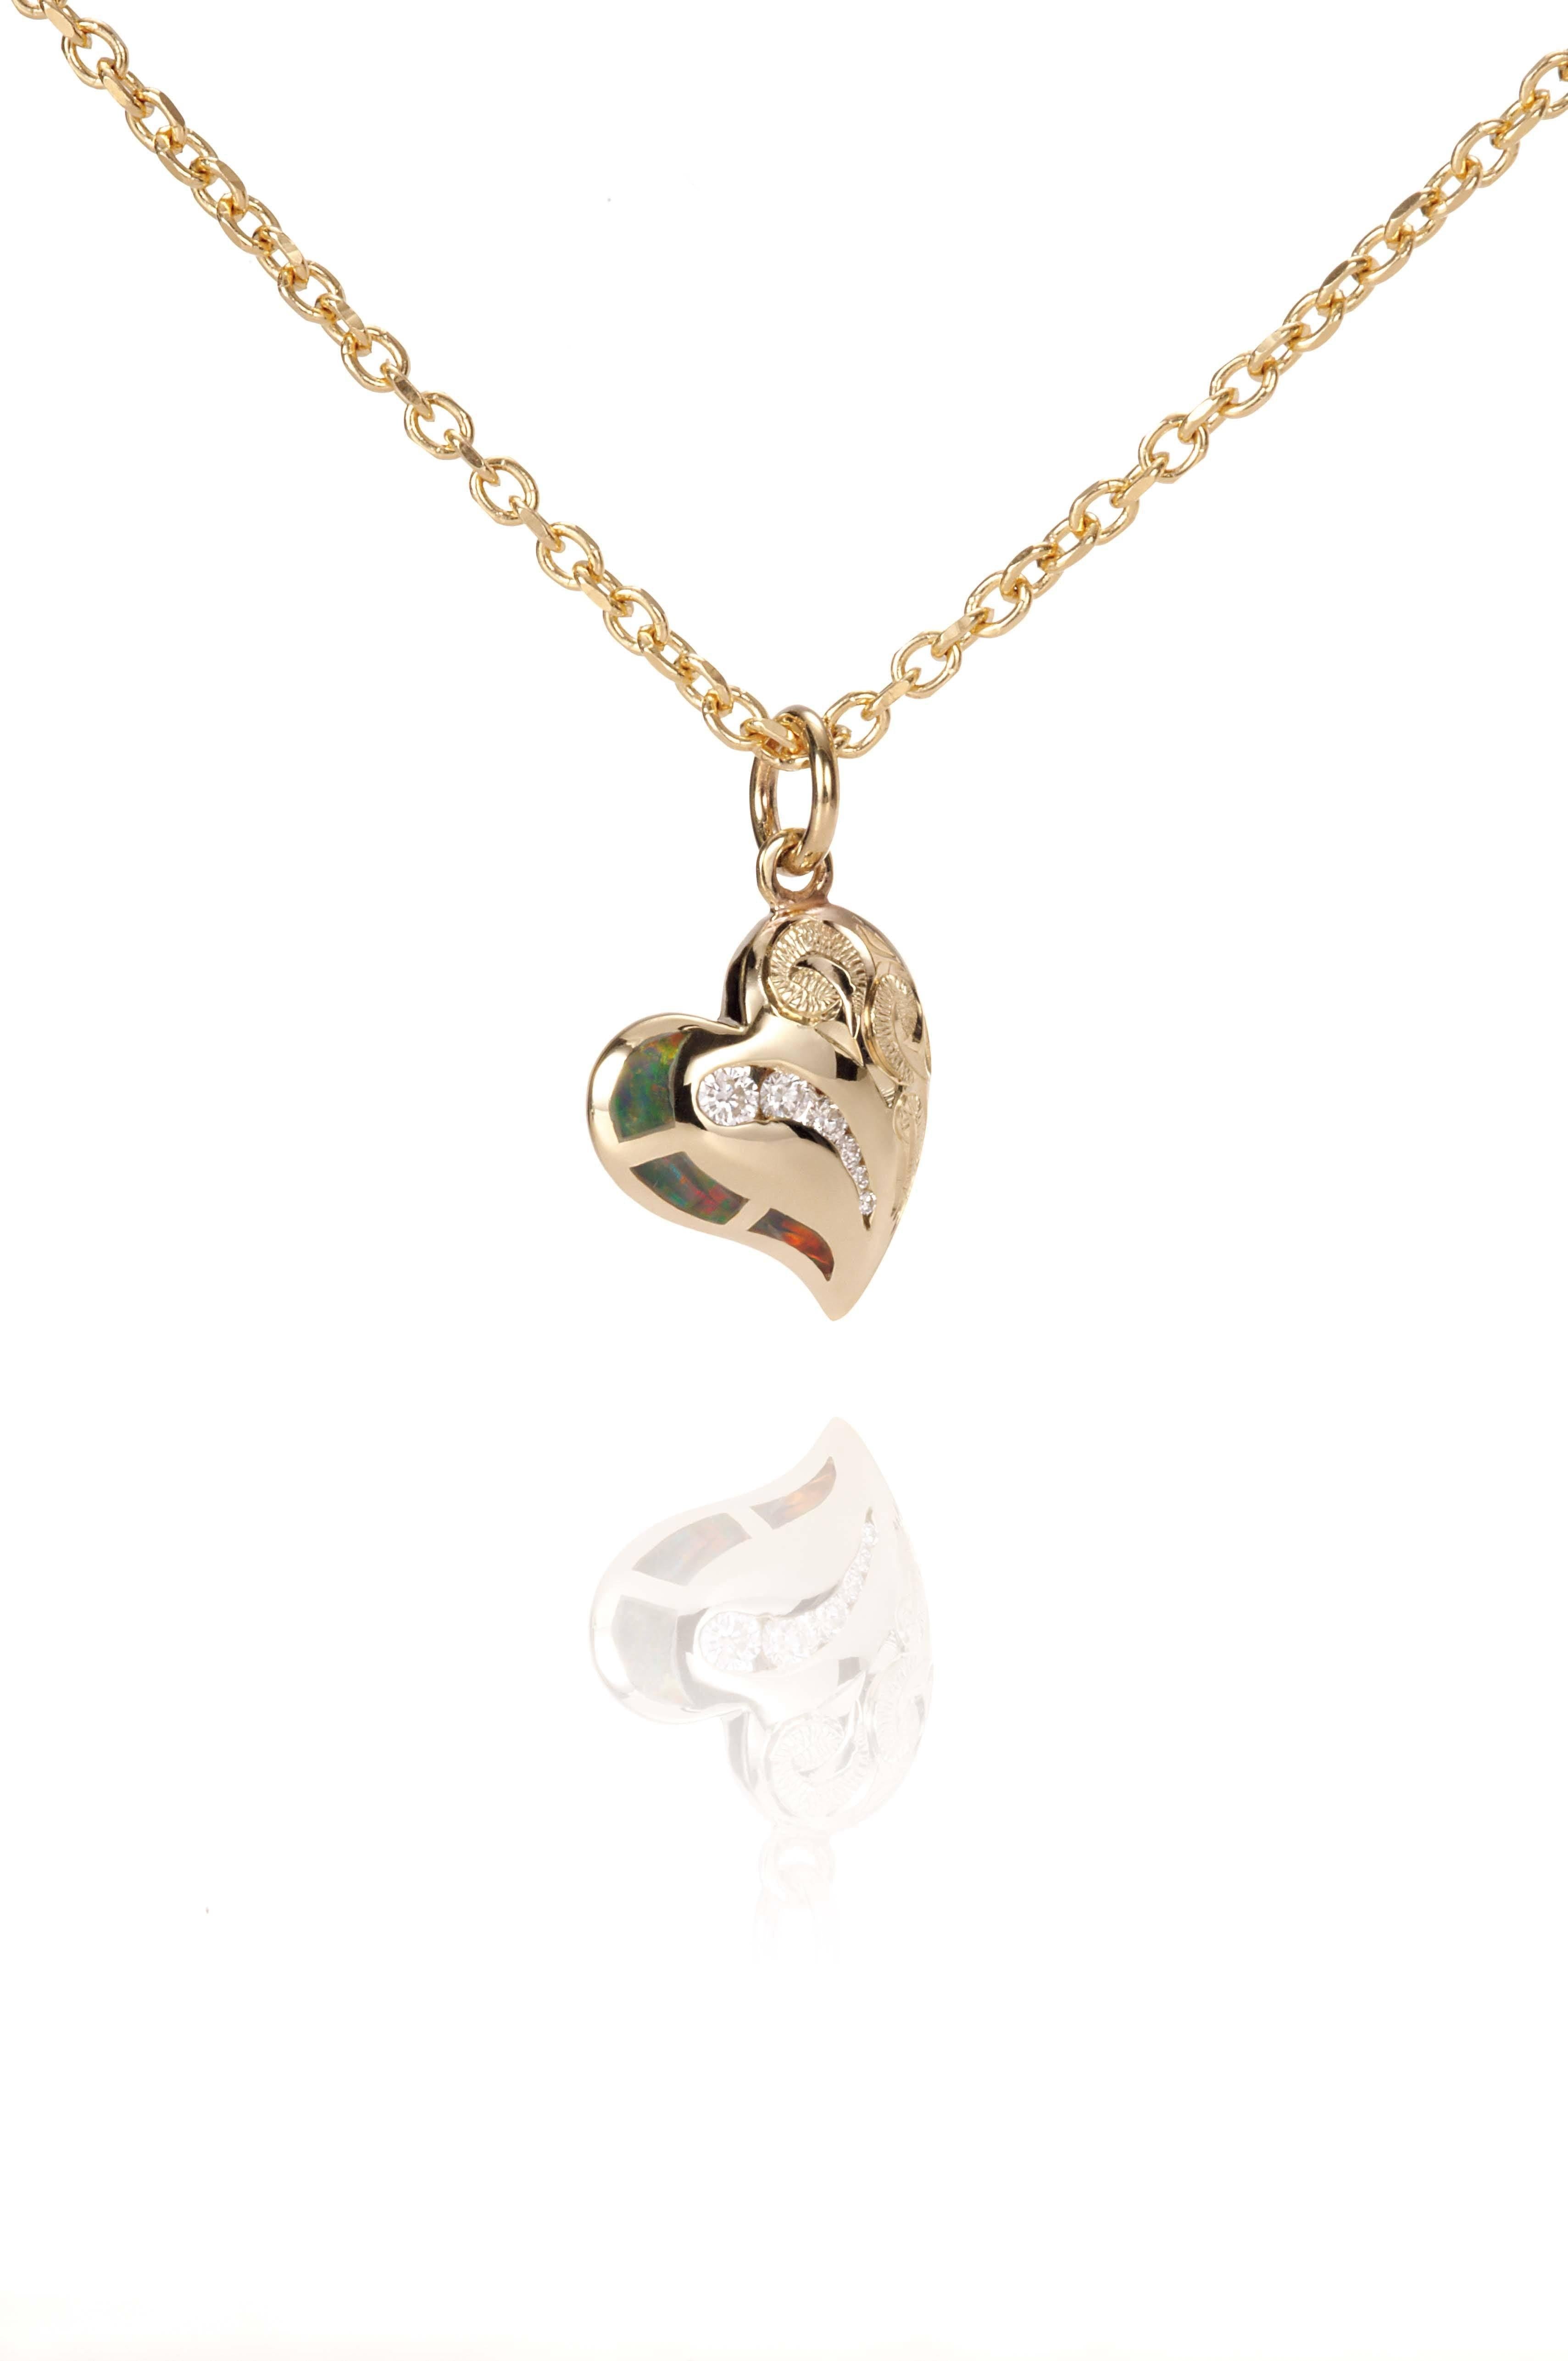 The picture shows a 14K yellow gold opal heart pendant with hand engravings.